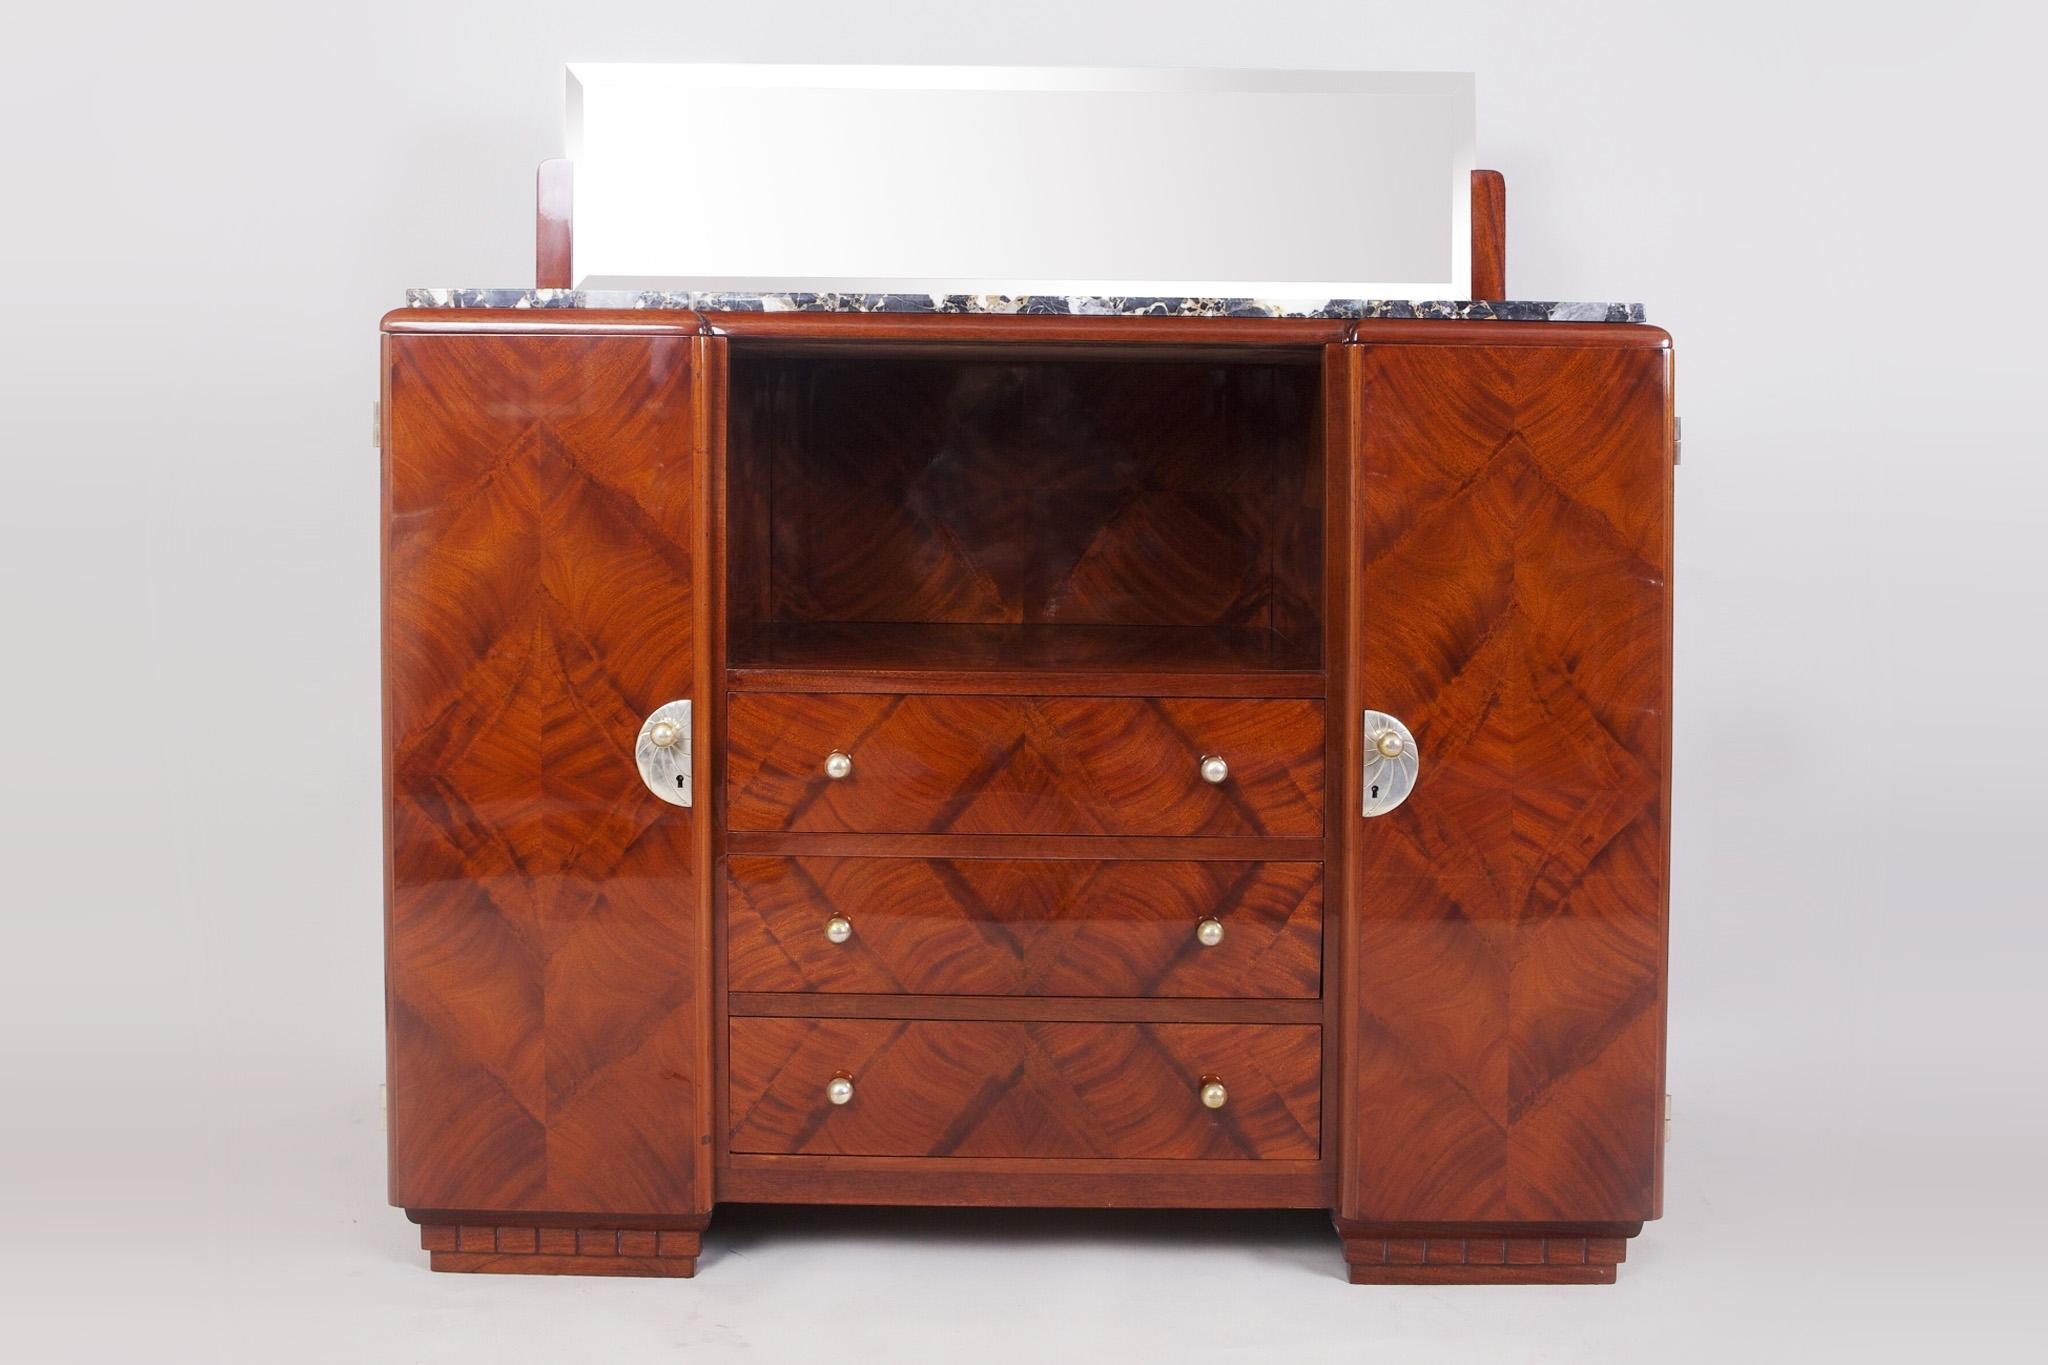 French Art Deco Sideboard with Marble Top and Mirror, 1920s, Mahogany In Good Condition For Sale In Horomerice, CZ